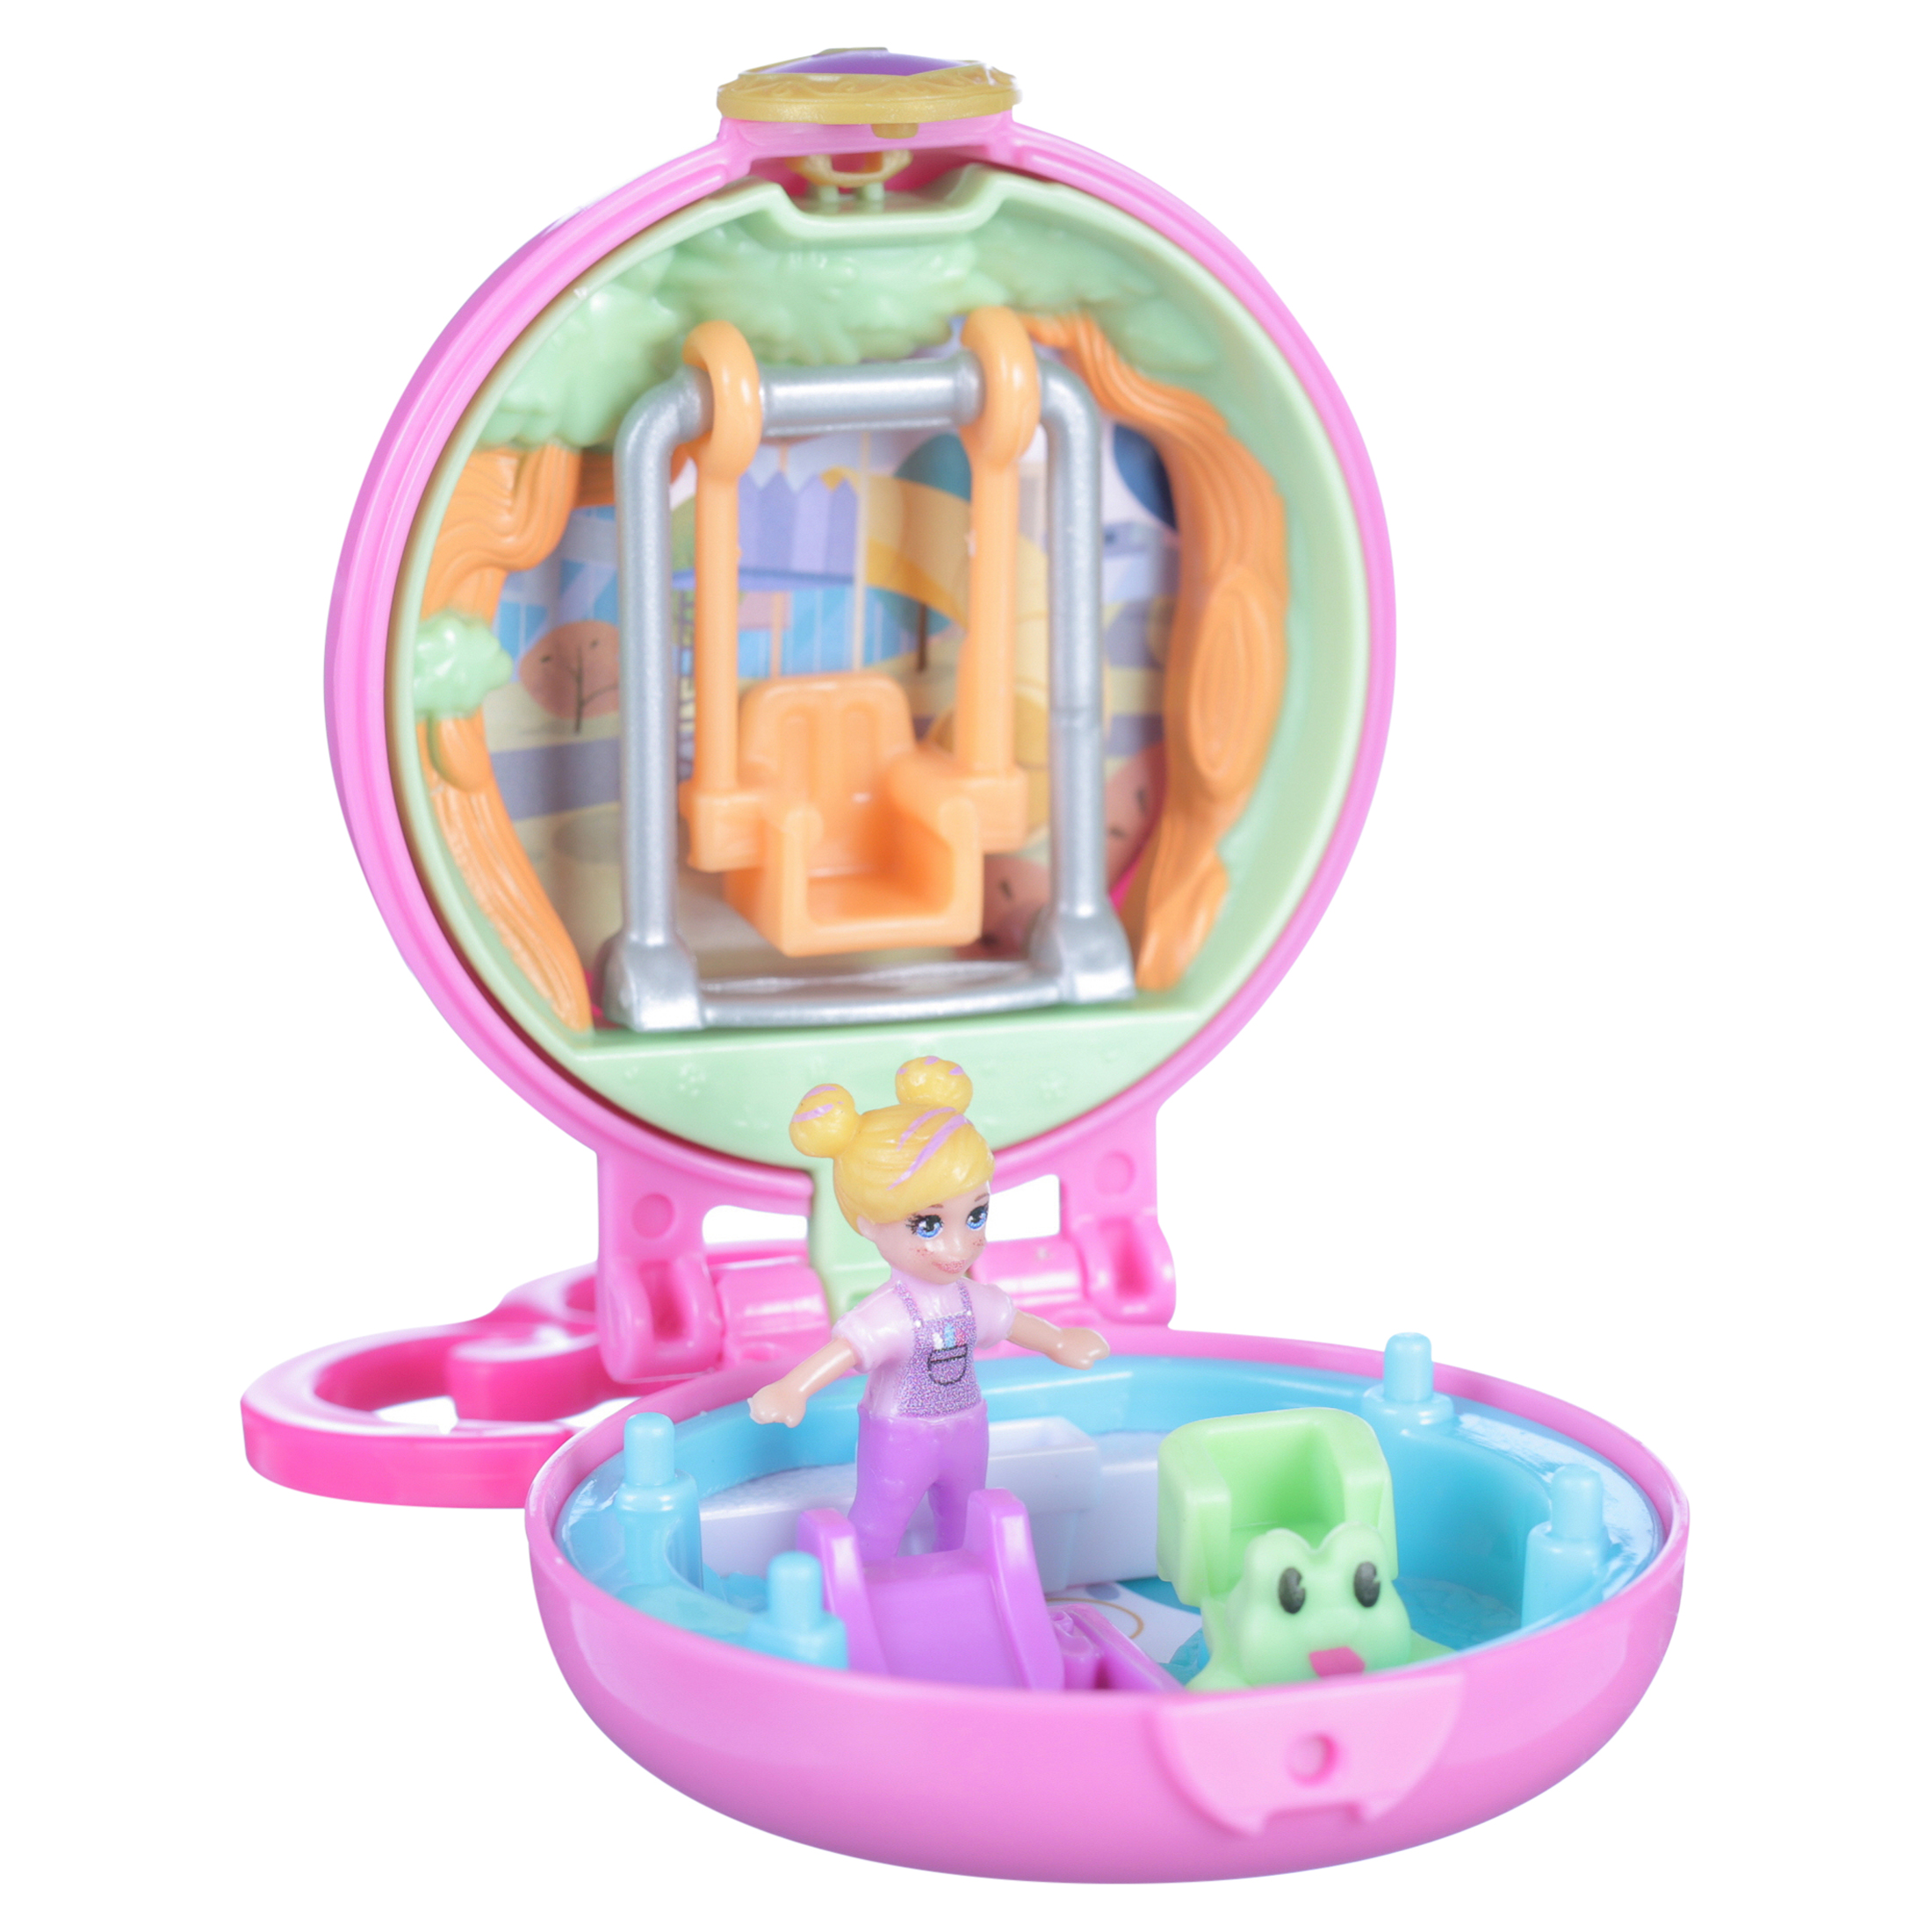 Polly Pocket Tiny Pocket Places Polly Playground Compact - image 6 of 8